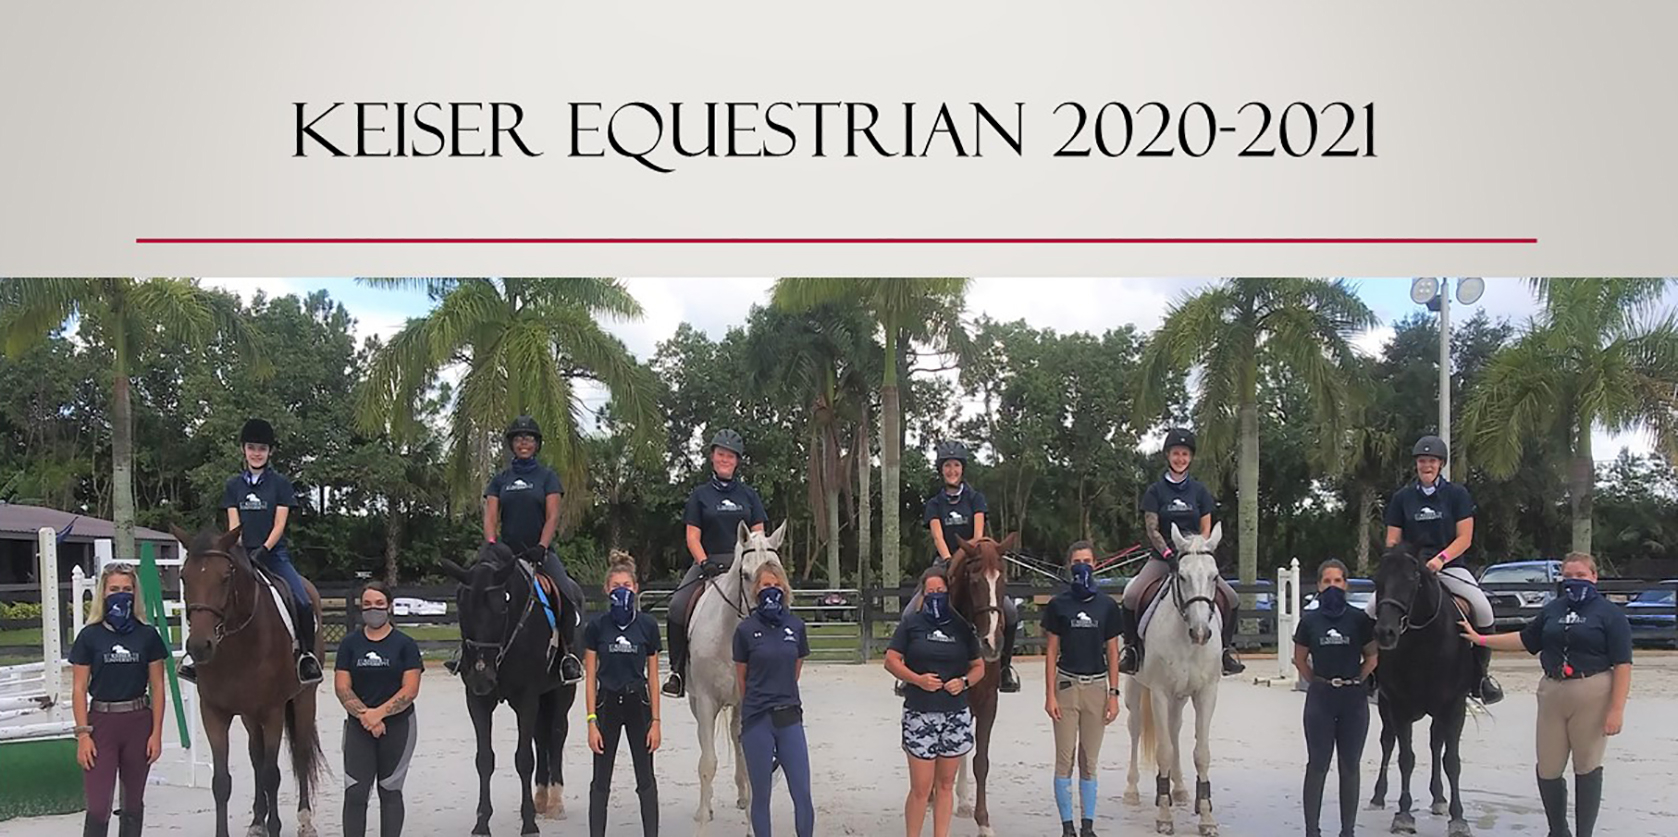 Keiser University Equestrian Students Prepare For An